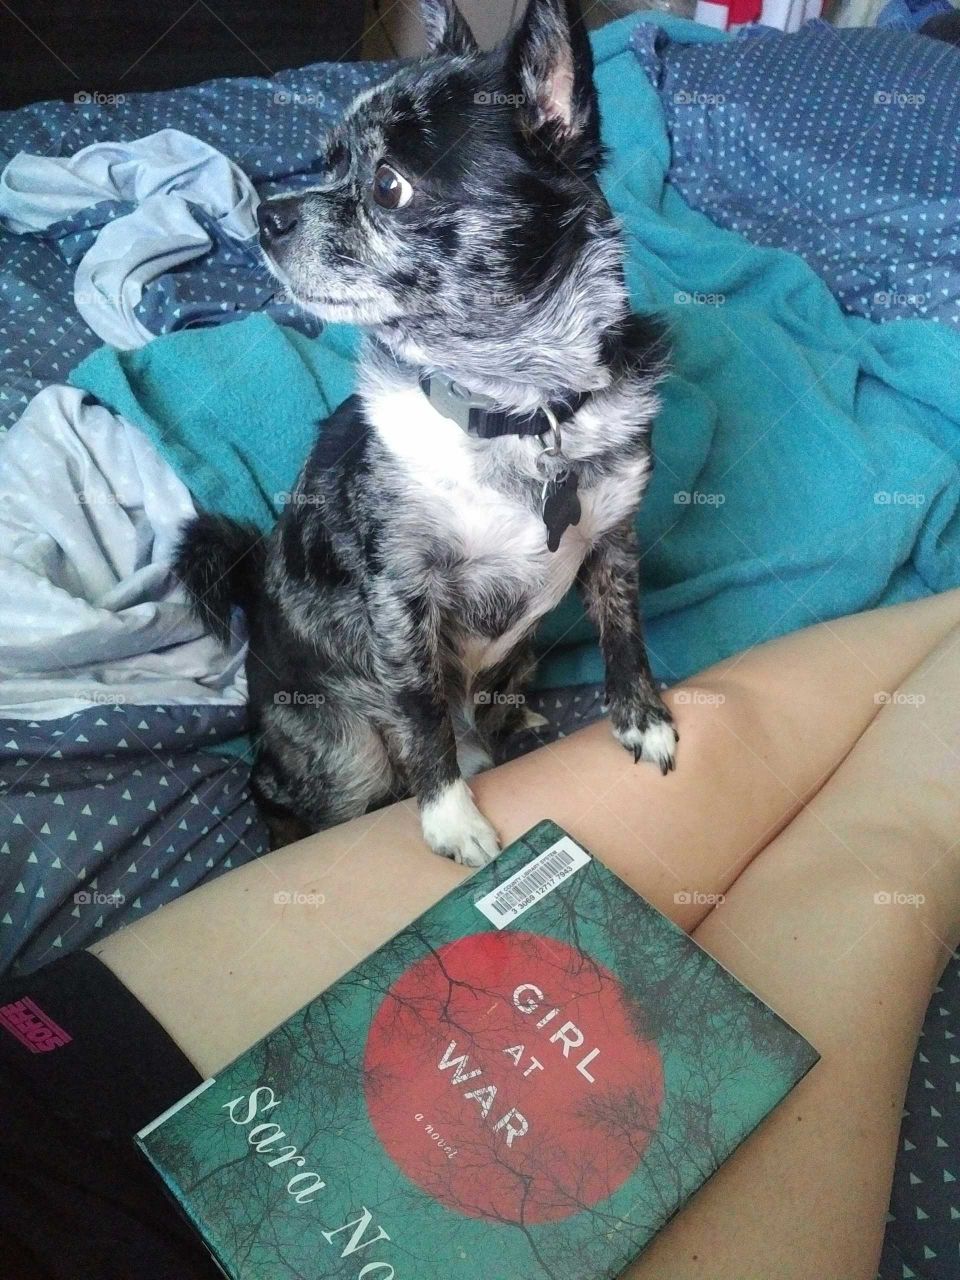 Chihuahua and a book